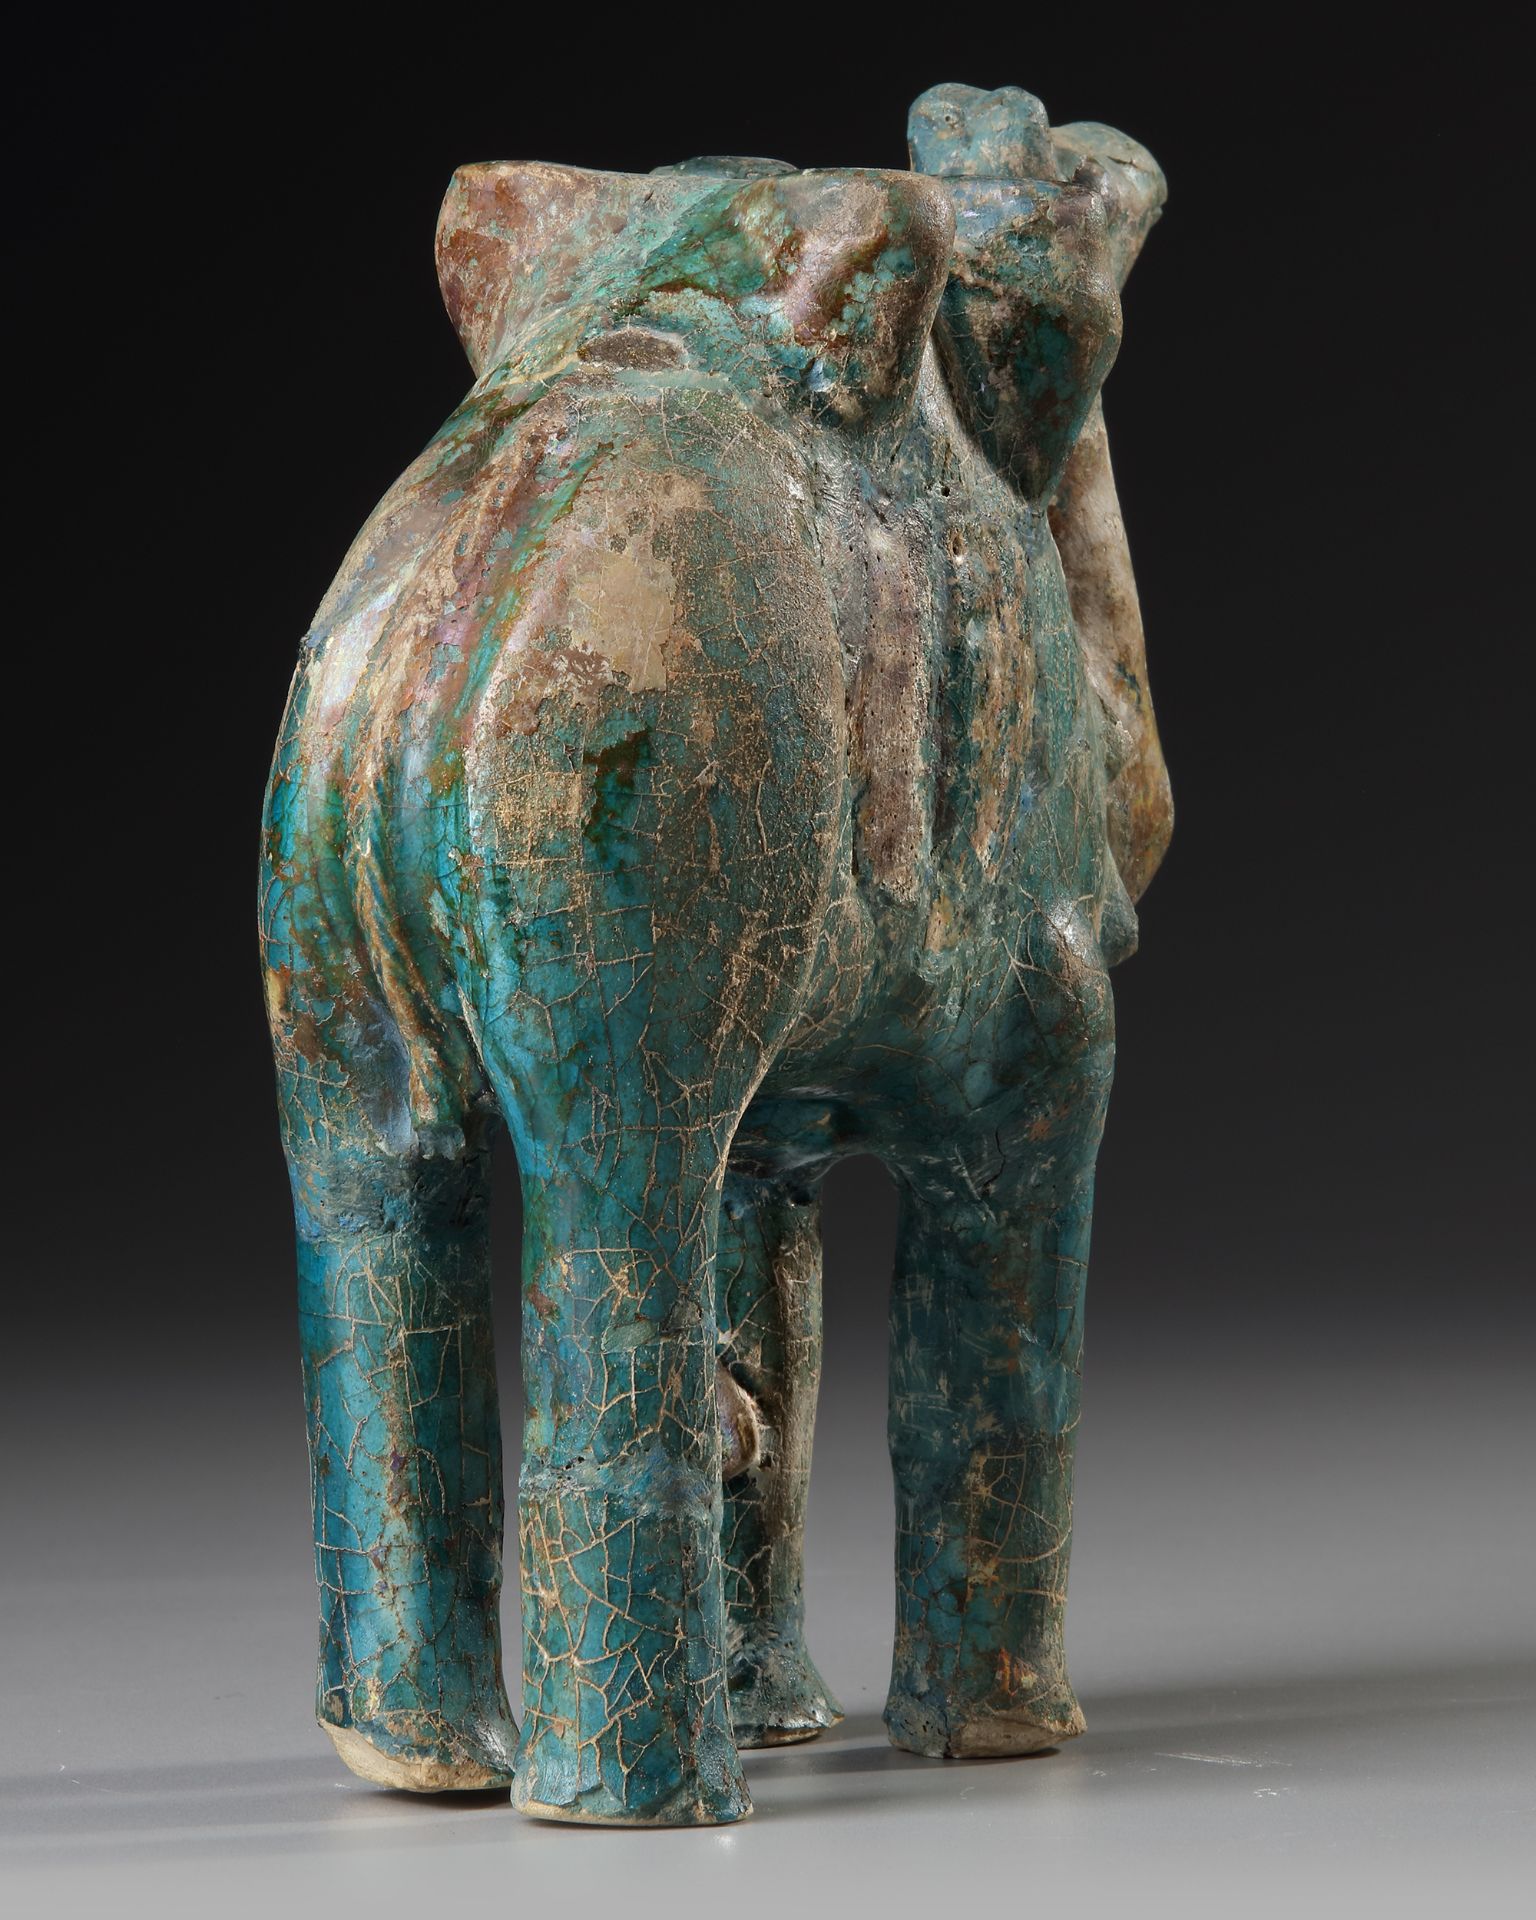 A TURQUOISE GLAZED POTTERY FIGURE OF A CAMEL, KASHAN, PERSIA, 11TH-12TH CENTURY - Image 7 of 8